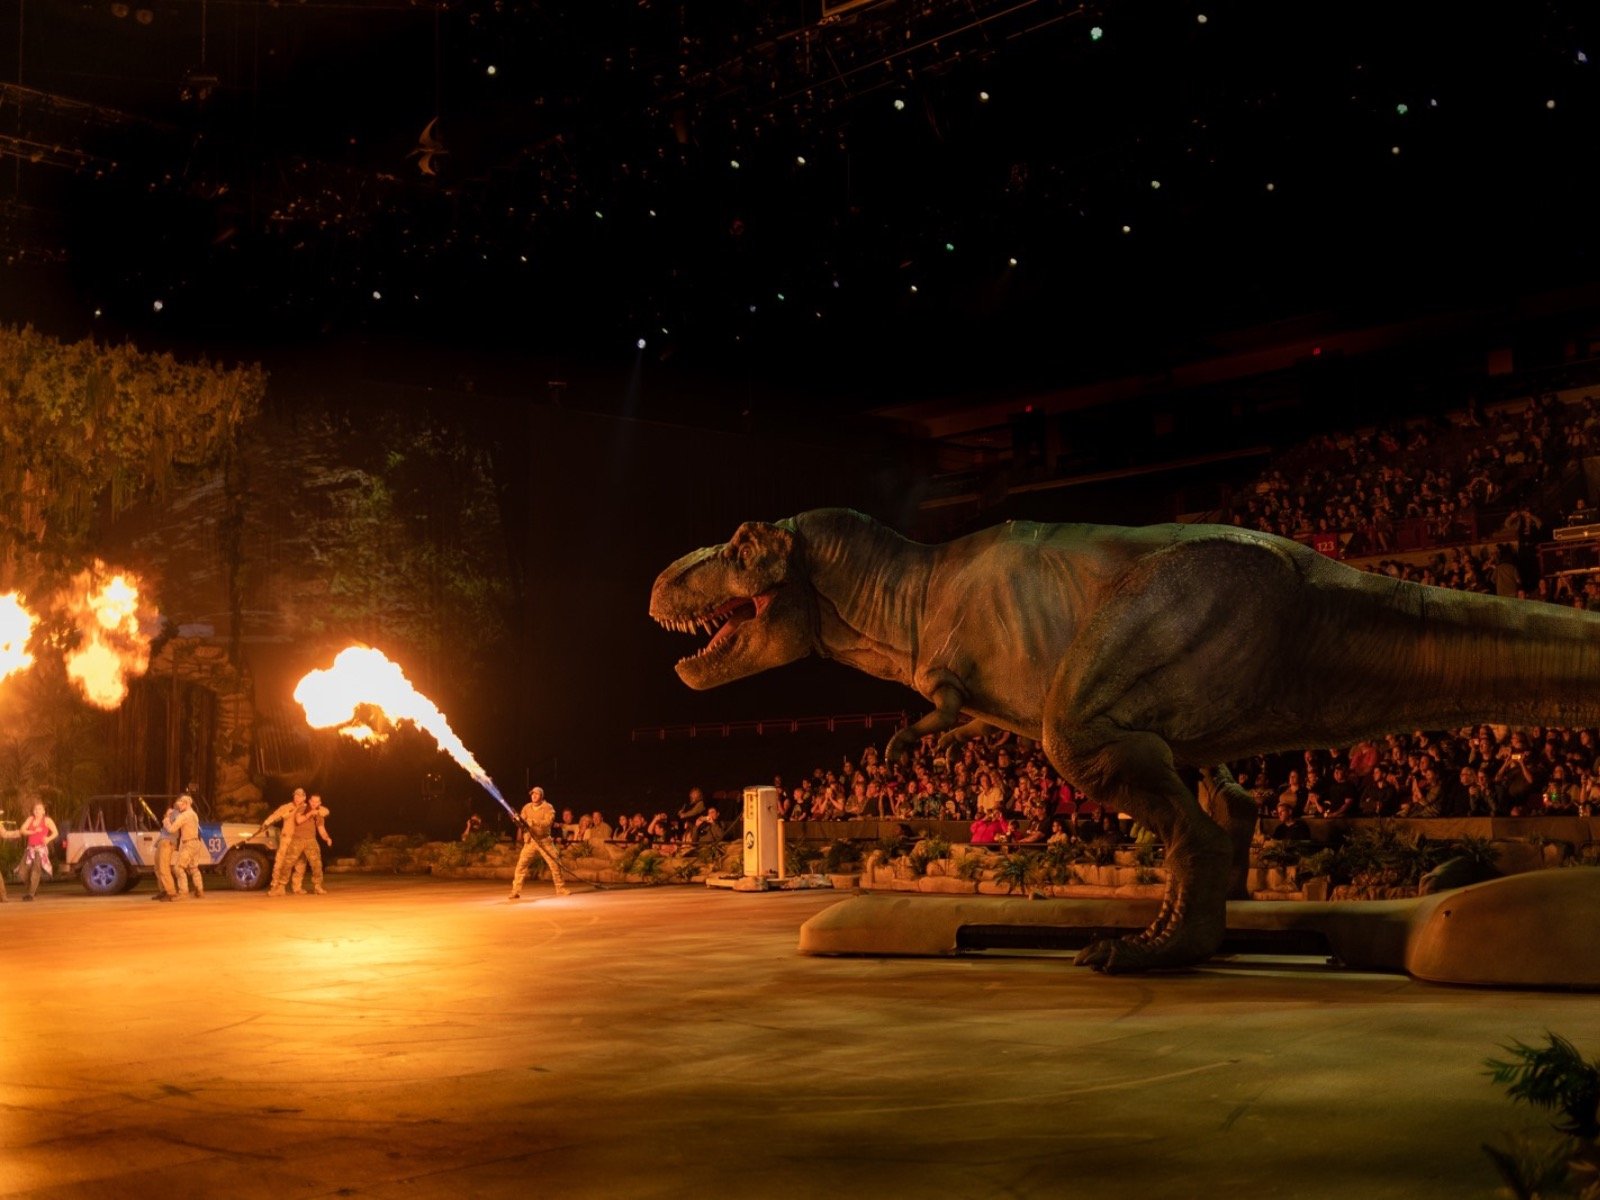 5 reasons to check out "Jurassic World Live Tour" OnMilwaukee